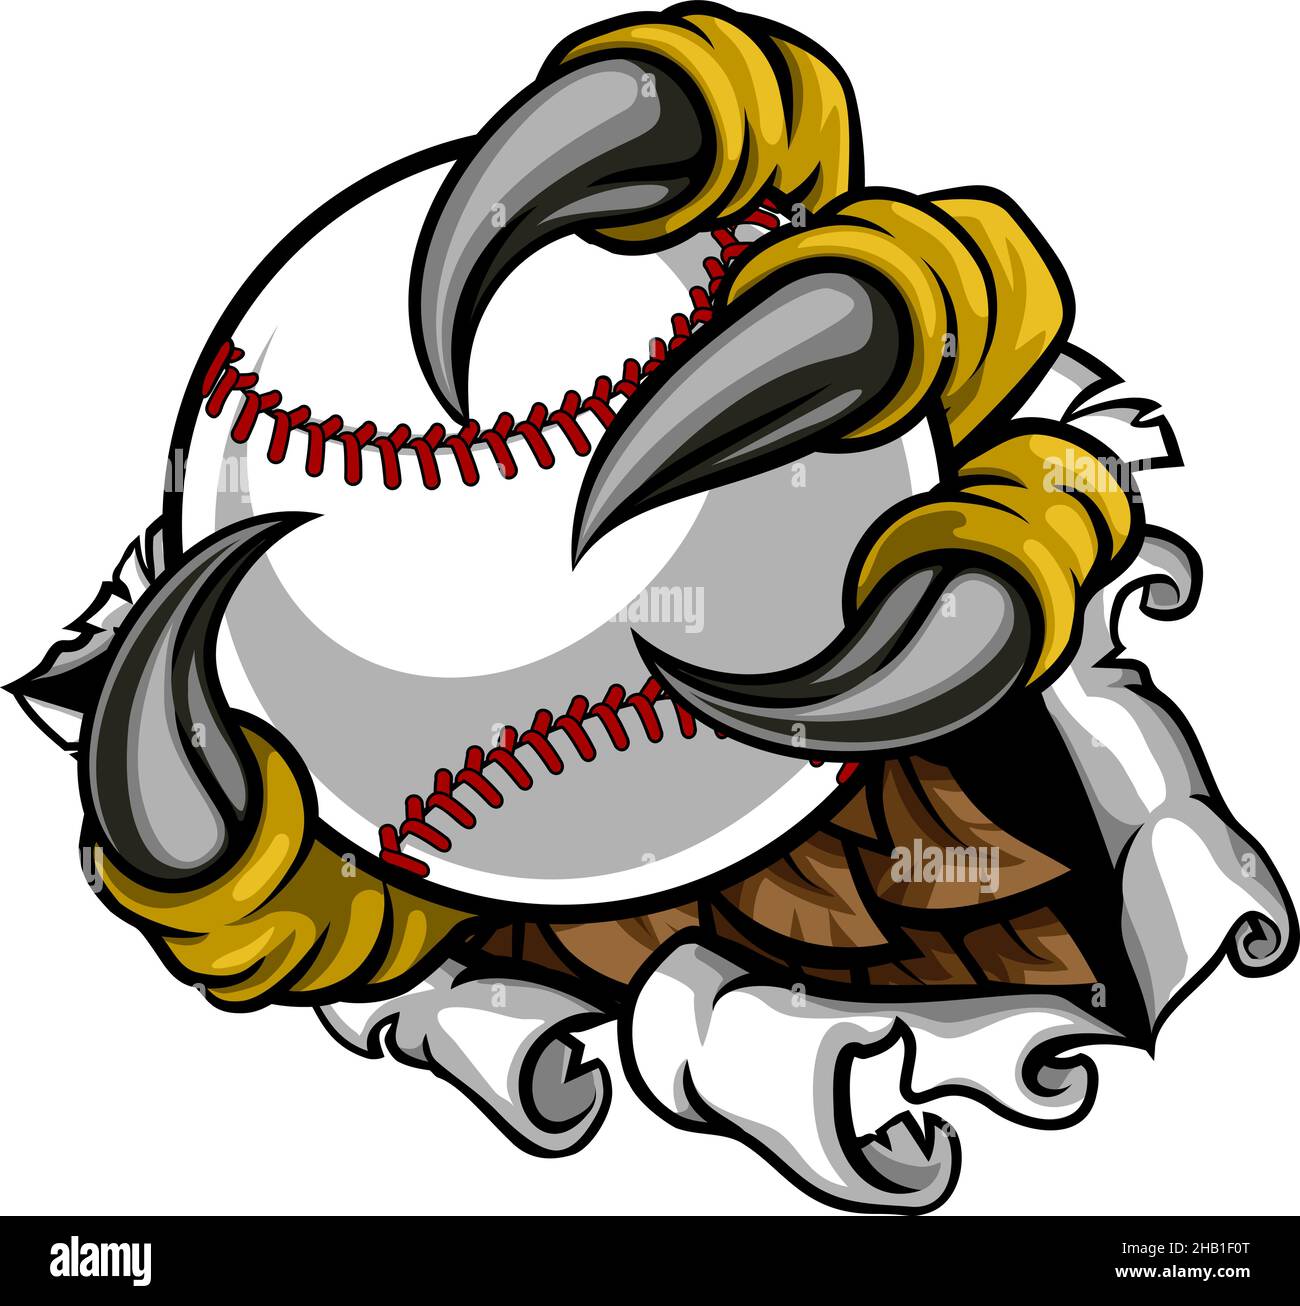 Tearing Ripping Claw Talons Holding Baseball Ball Stock Vector